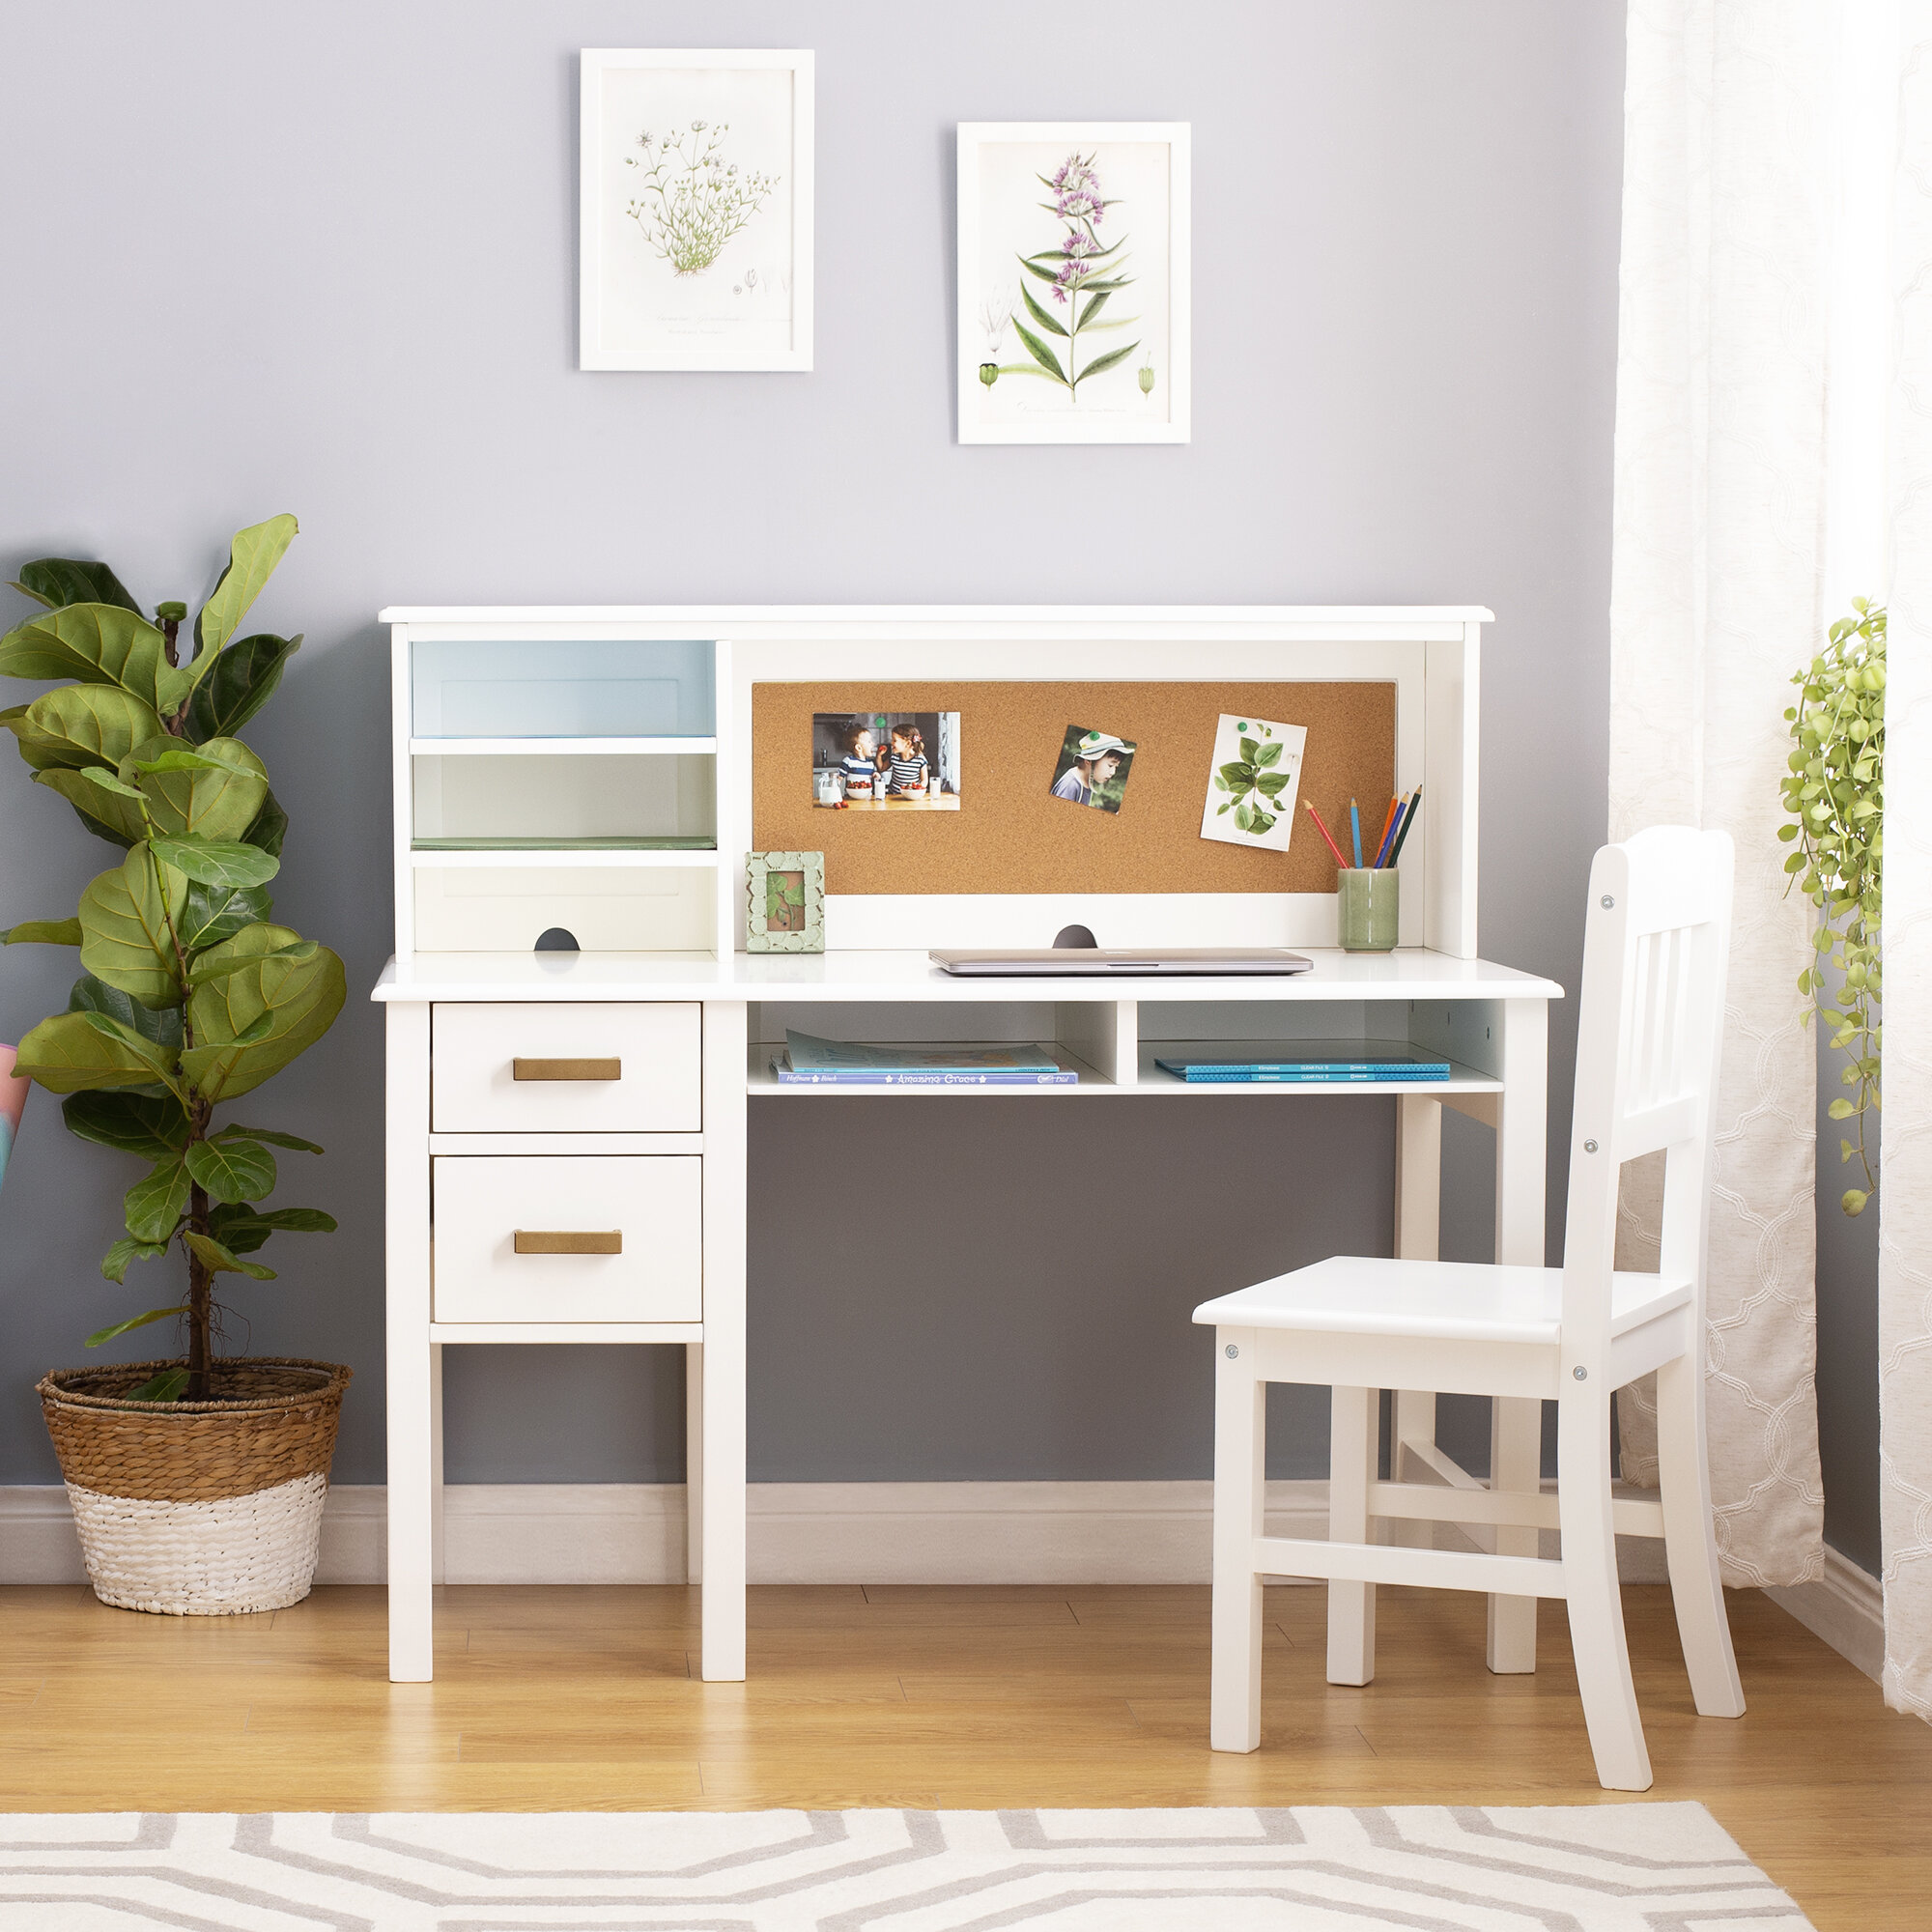 Taiga Kids Desk with Hutch and Chair Set